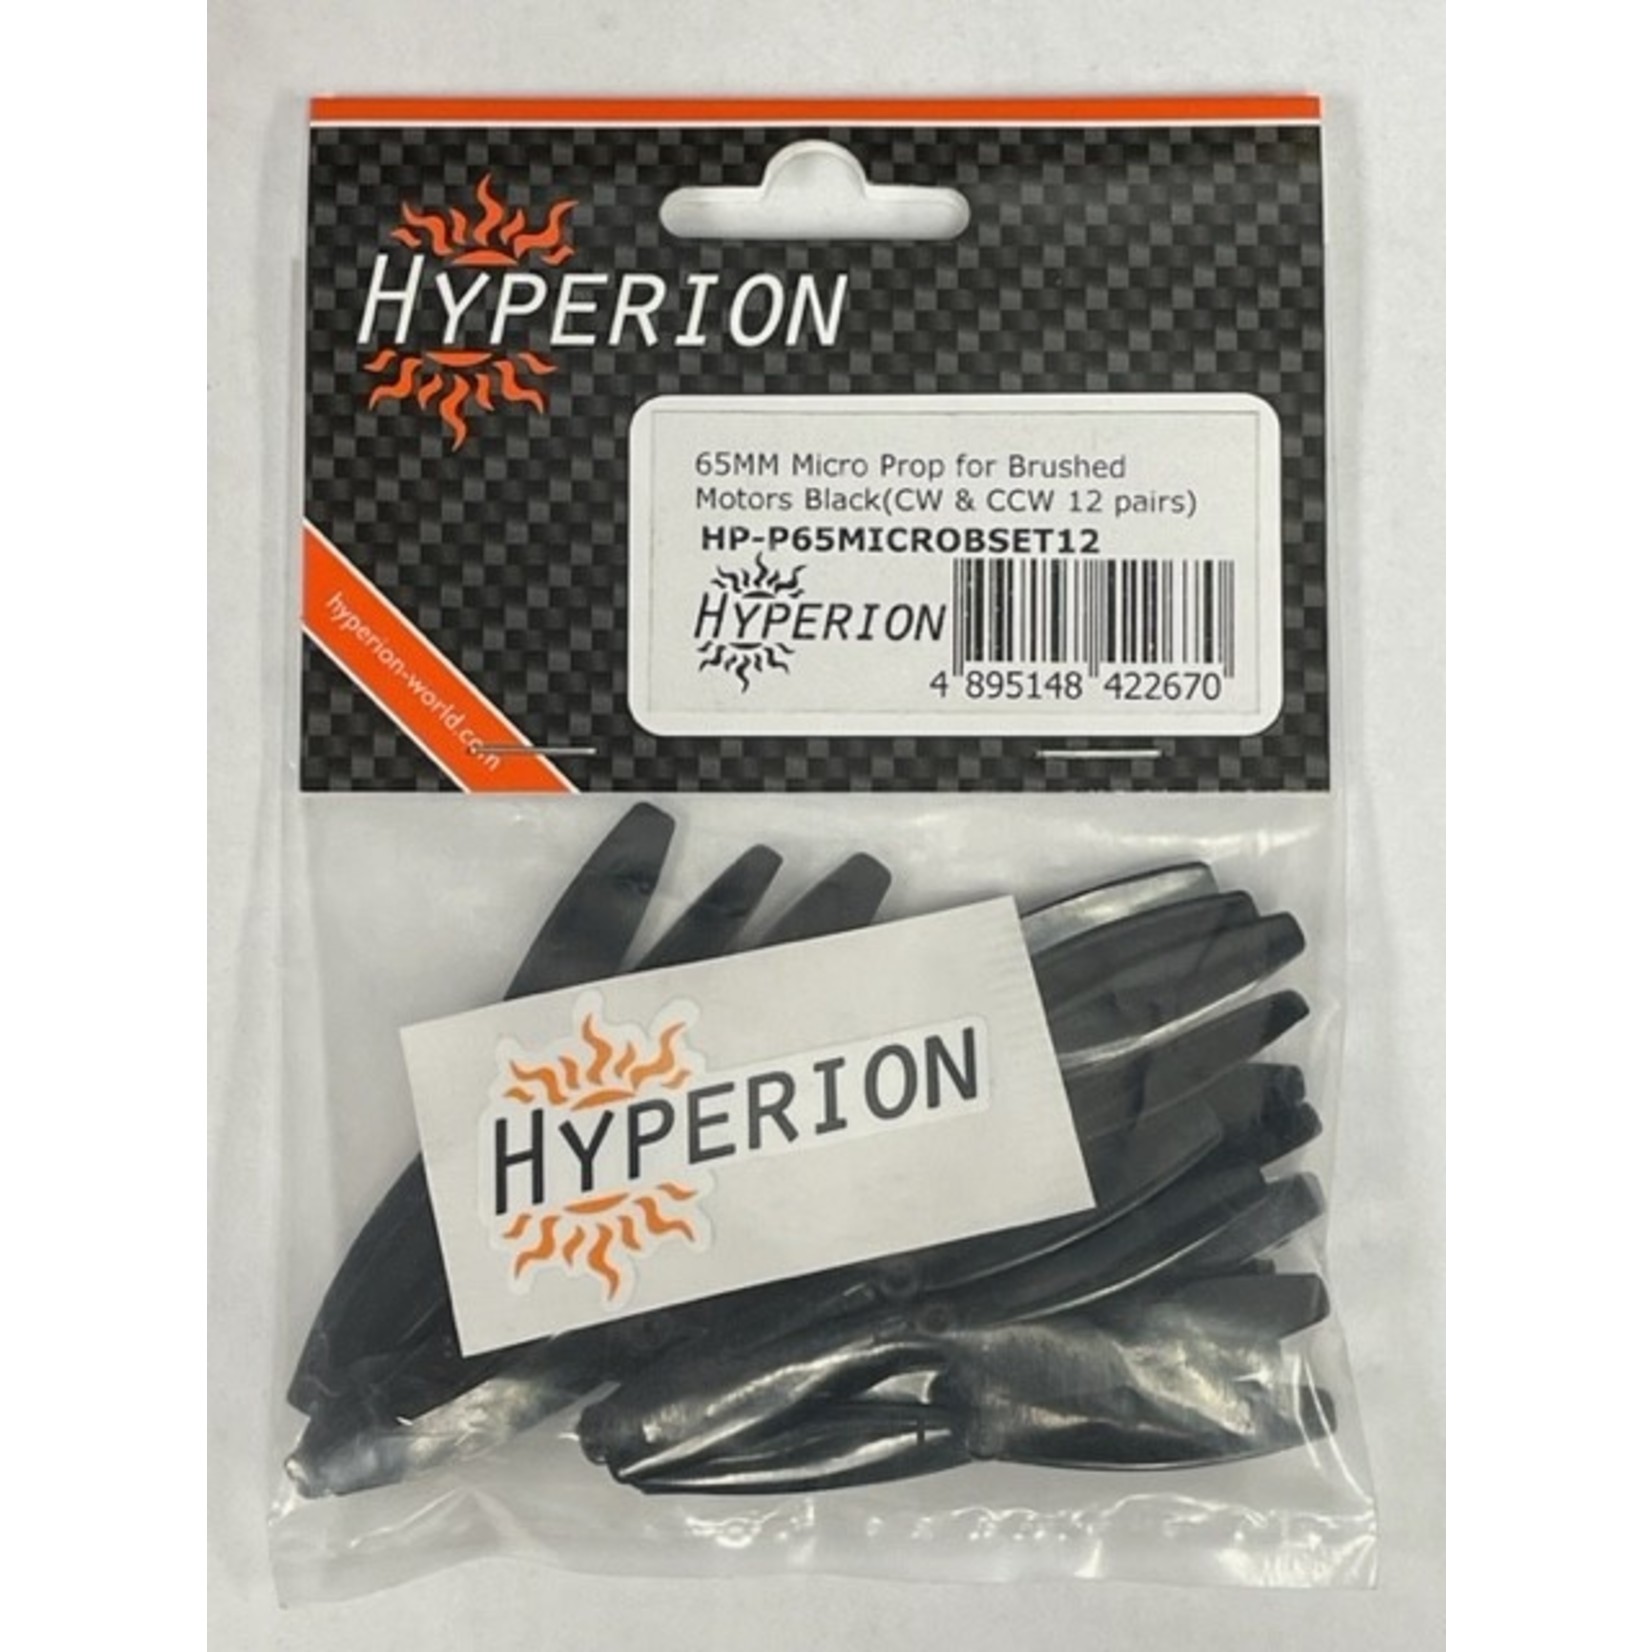 Hyperion HP-P65MICB12 Hyperion 65mm Micro Props for Brushed Motors (CW & CCW) ##